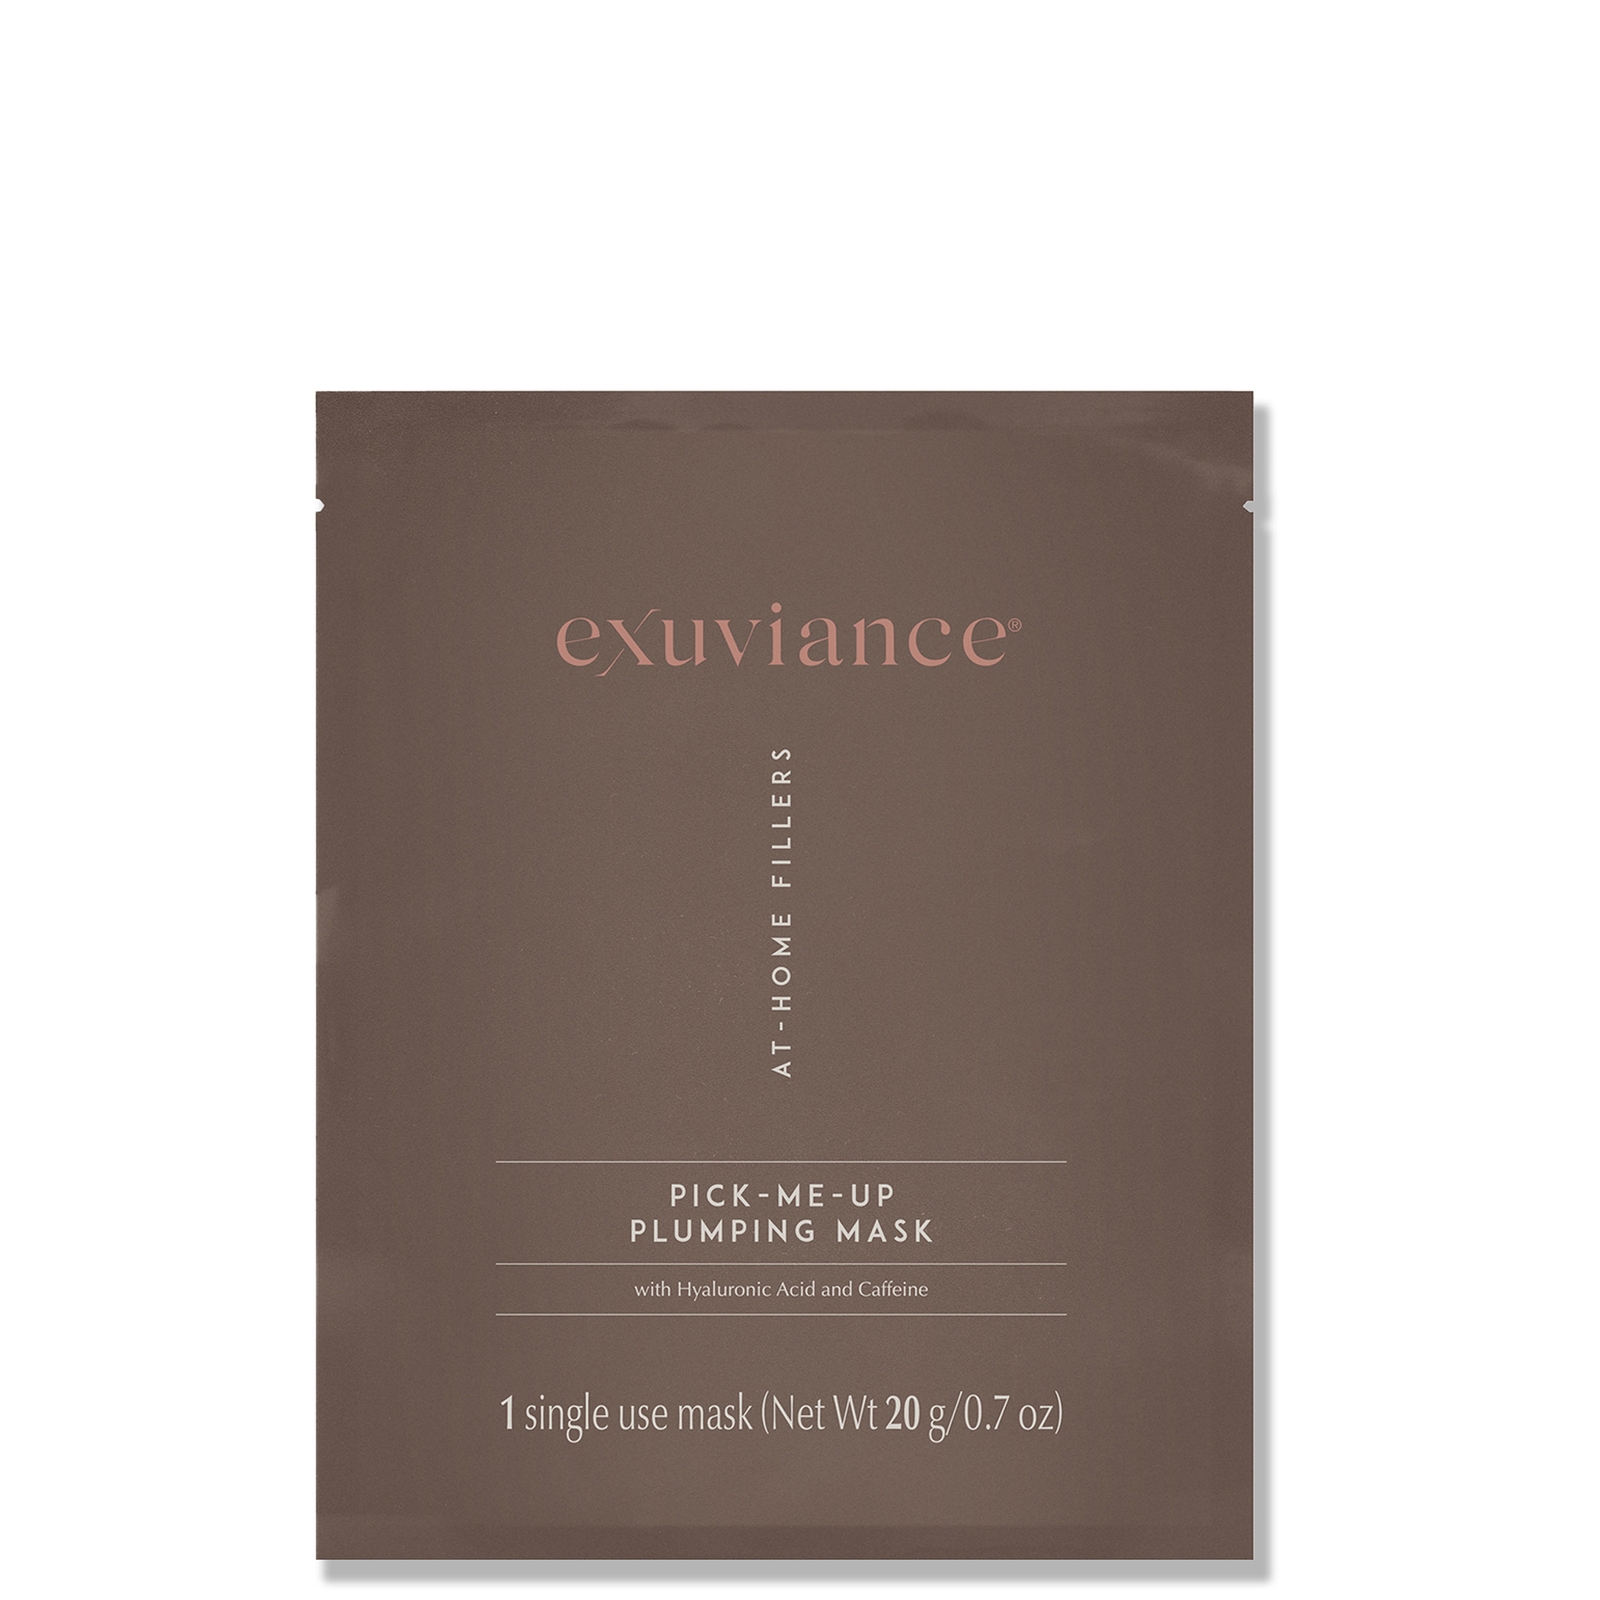 Exuviance Pick-me-up Plumping Mask - 1 Single Use Mask In White